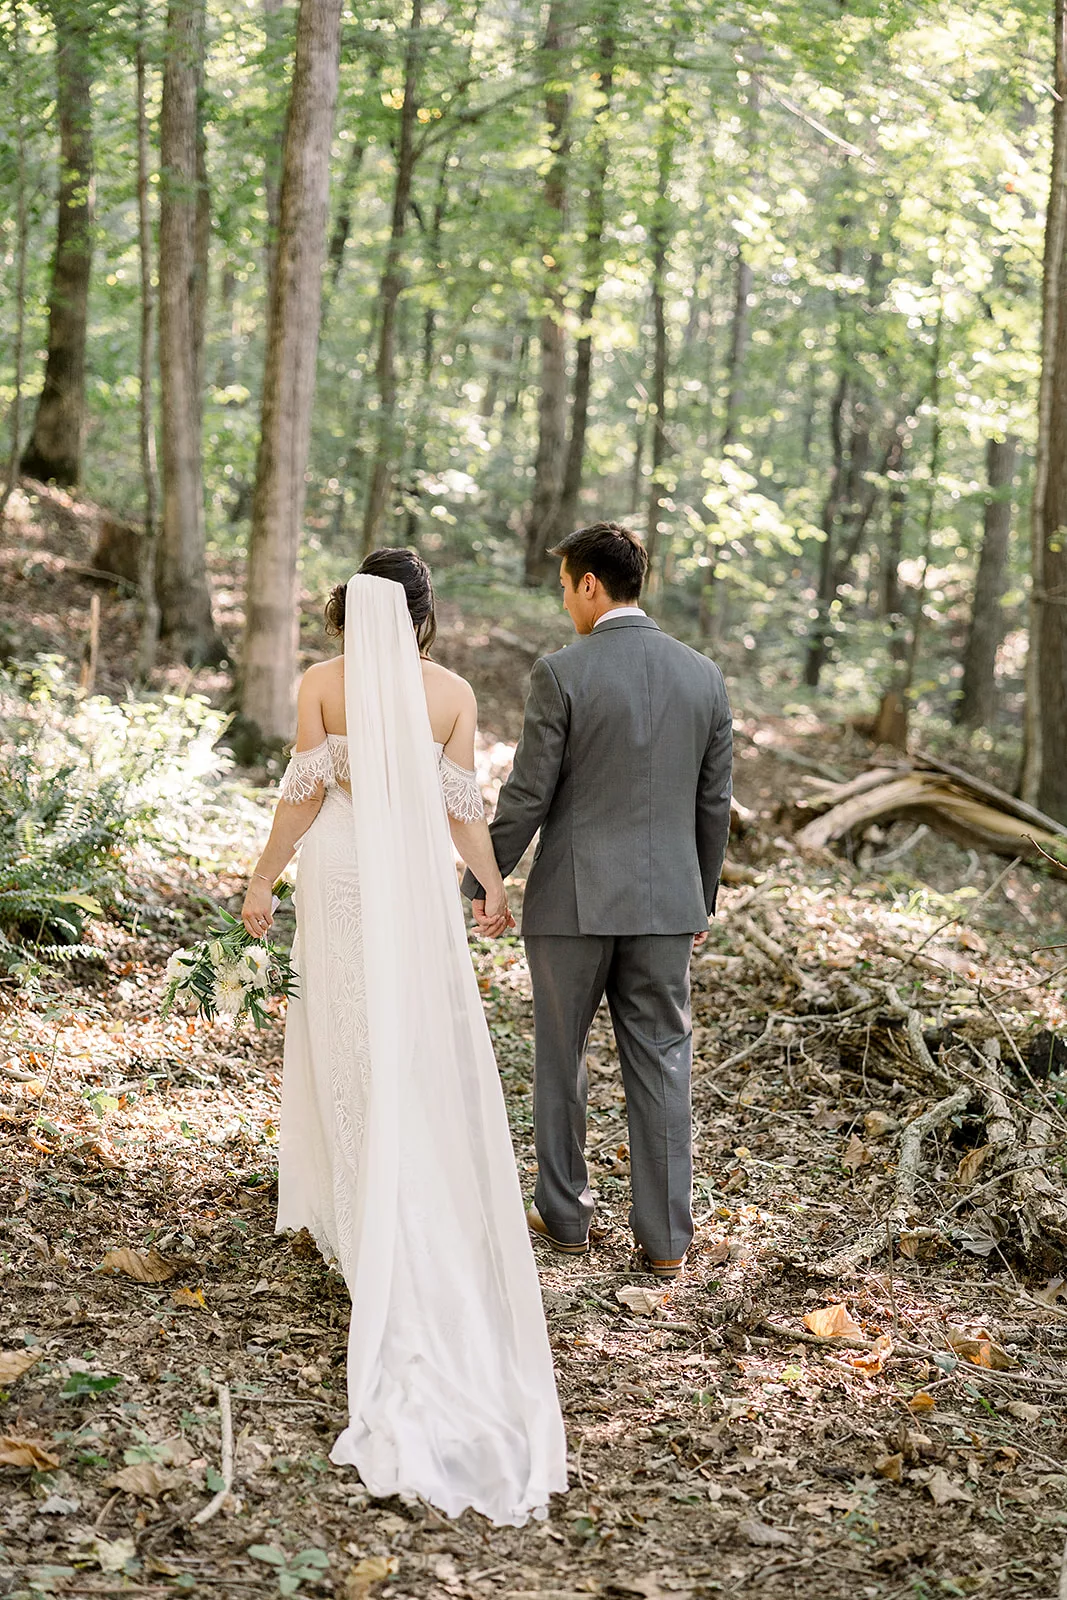 Newlyweds walk together holding hands up a forest trail